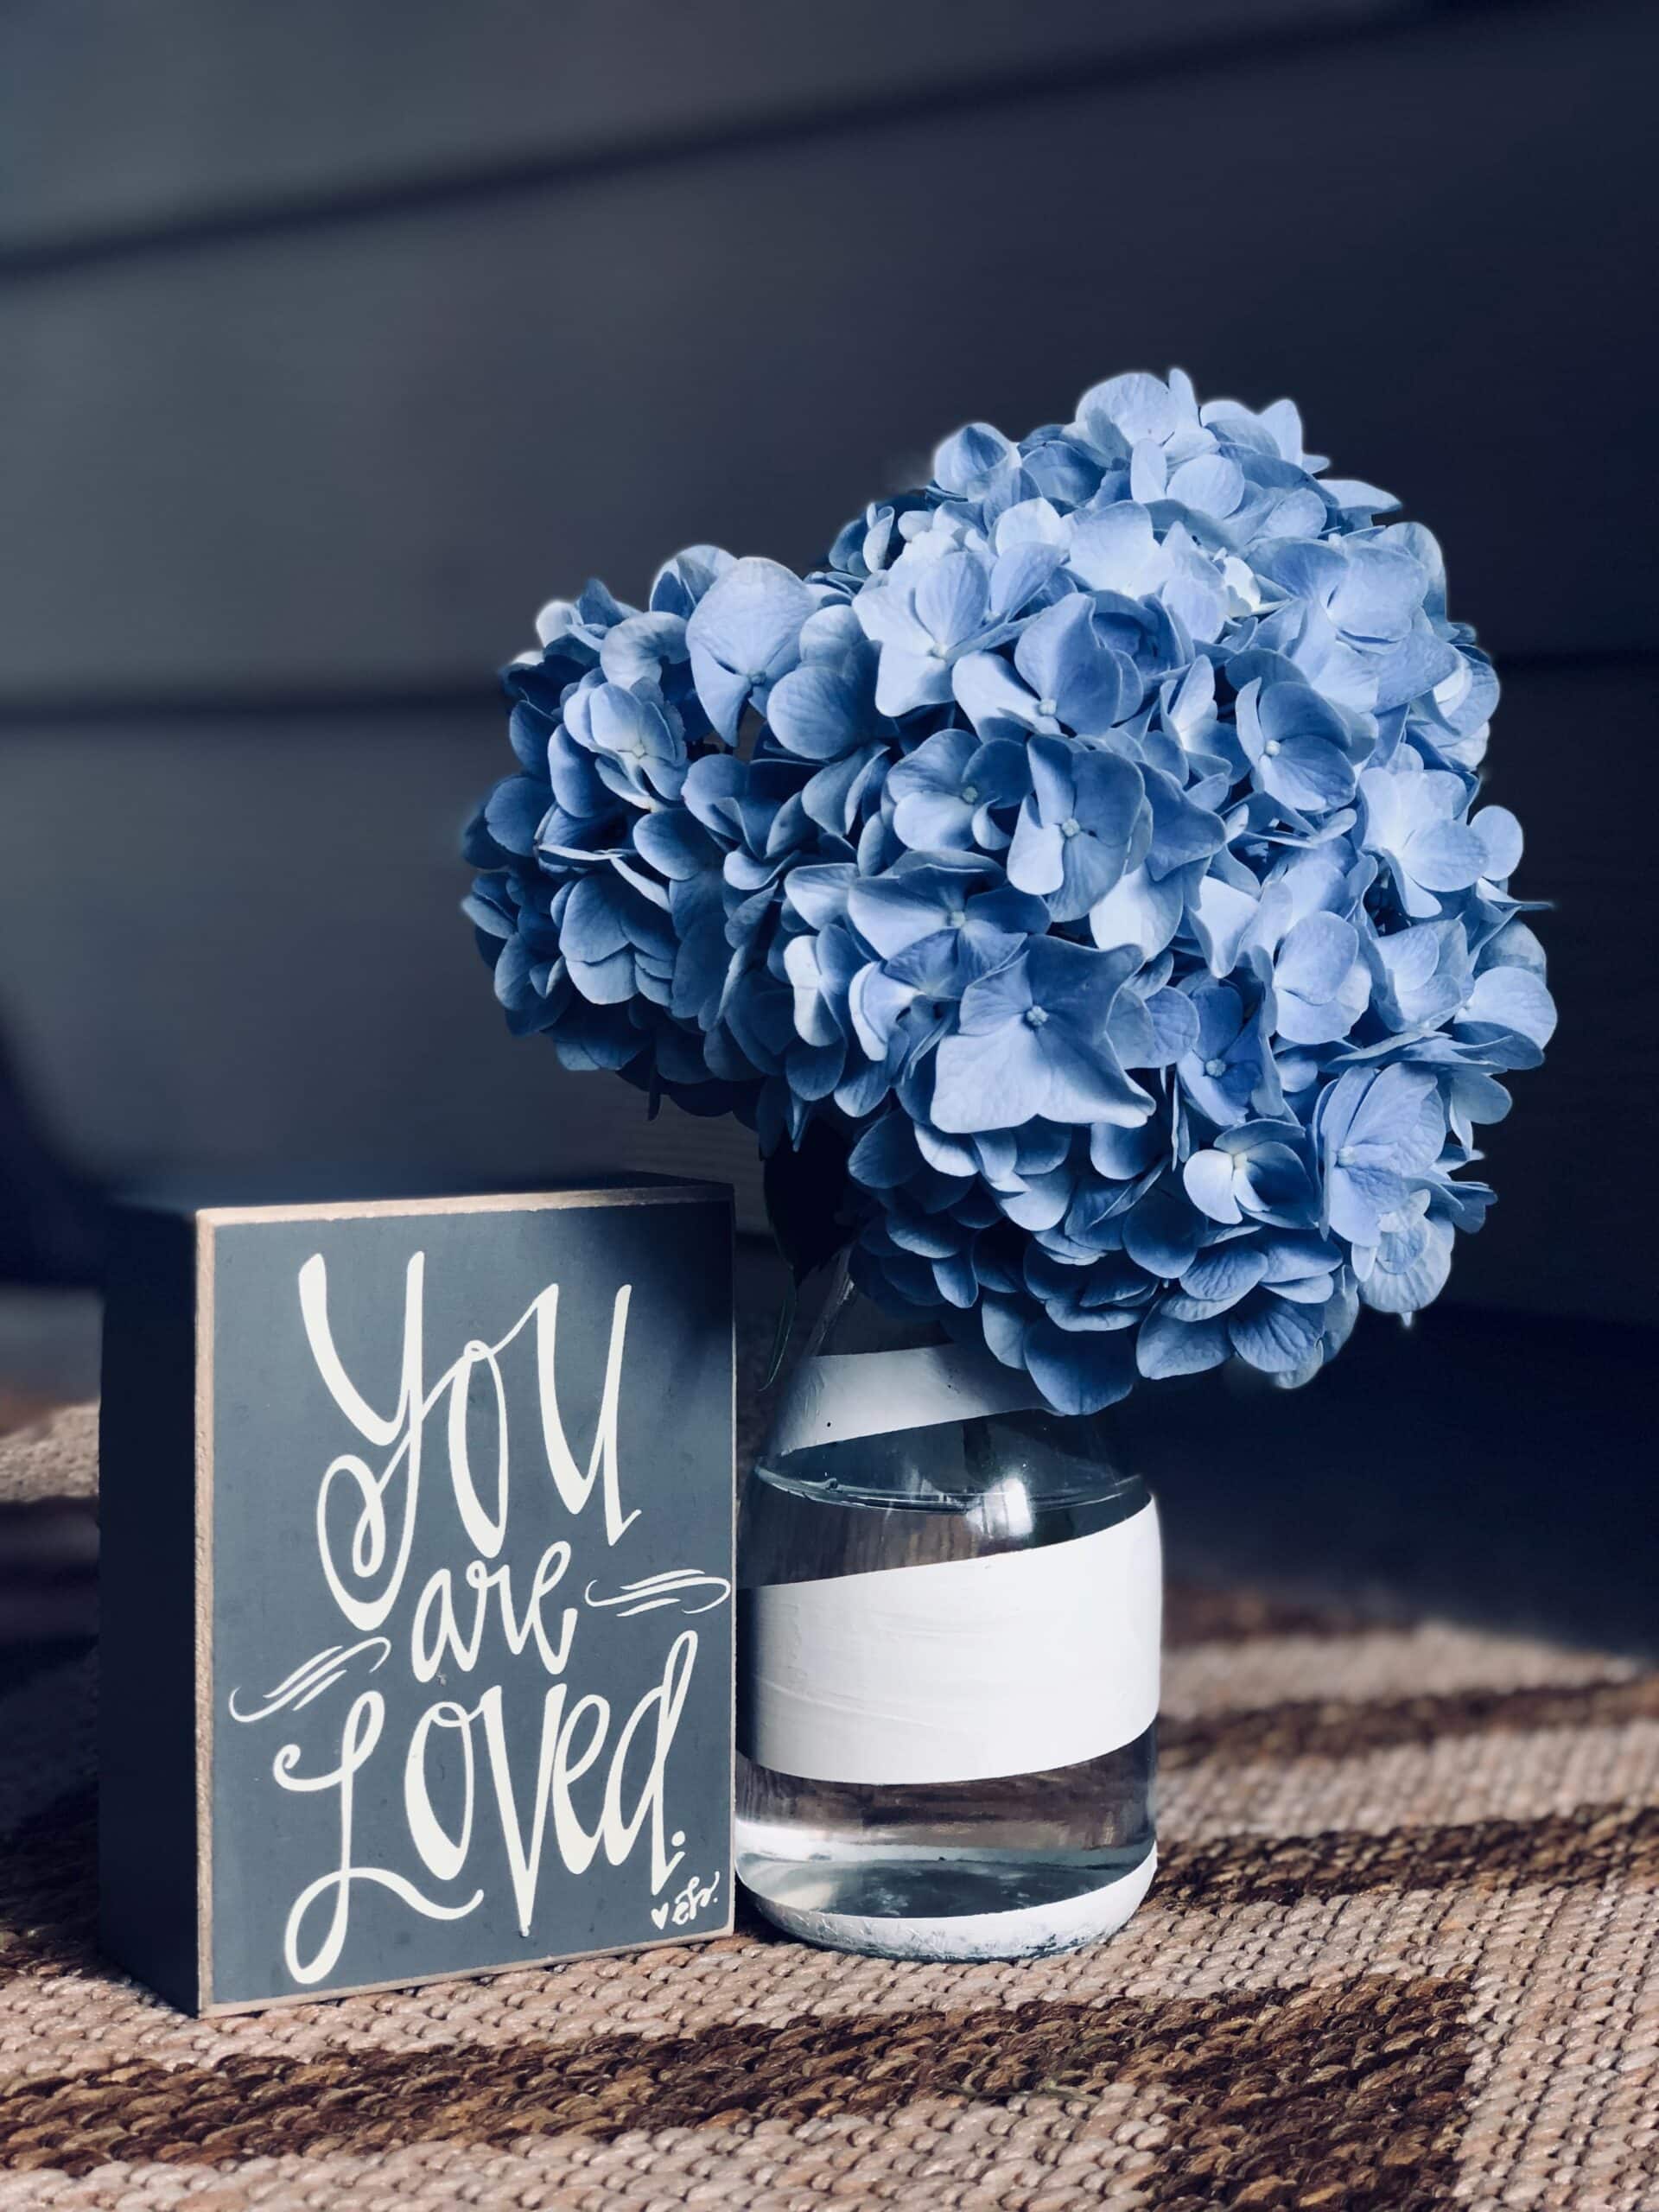 Blue hydrangea in a bottle vase with a text "You are Loved"